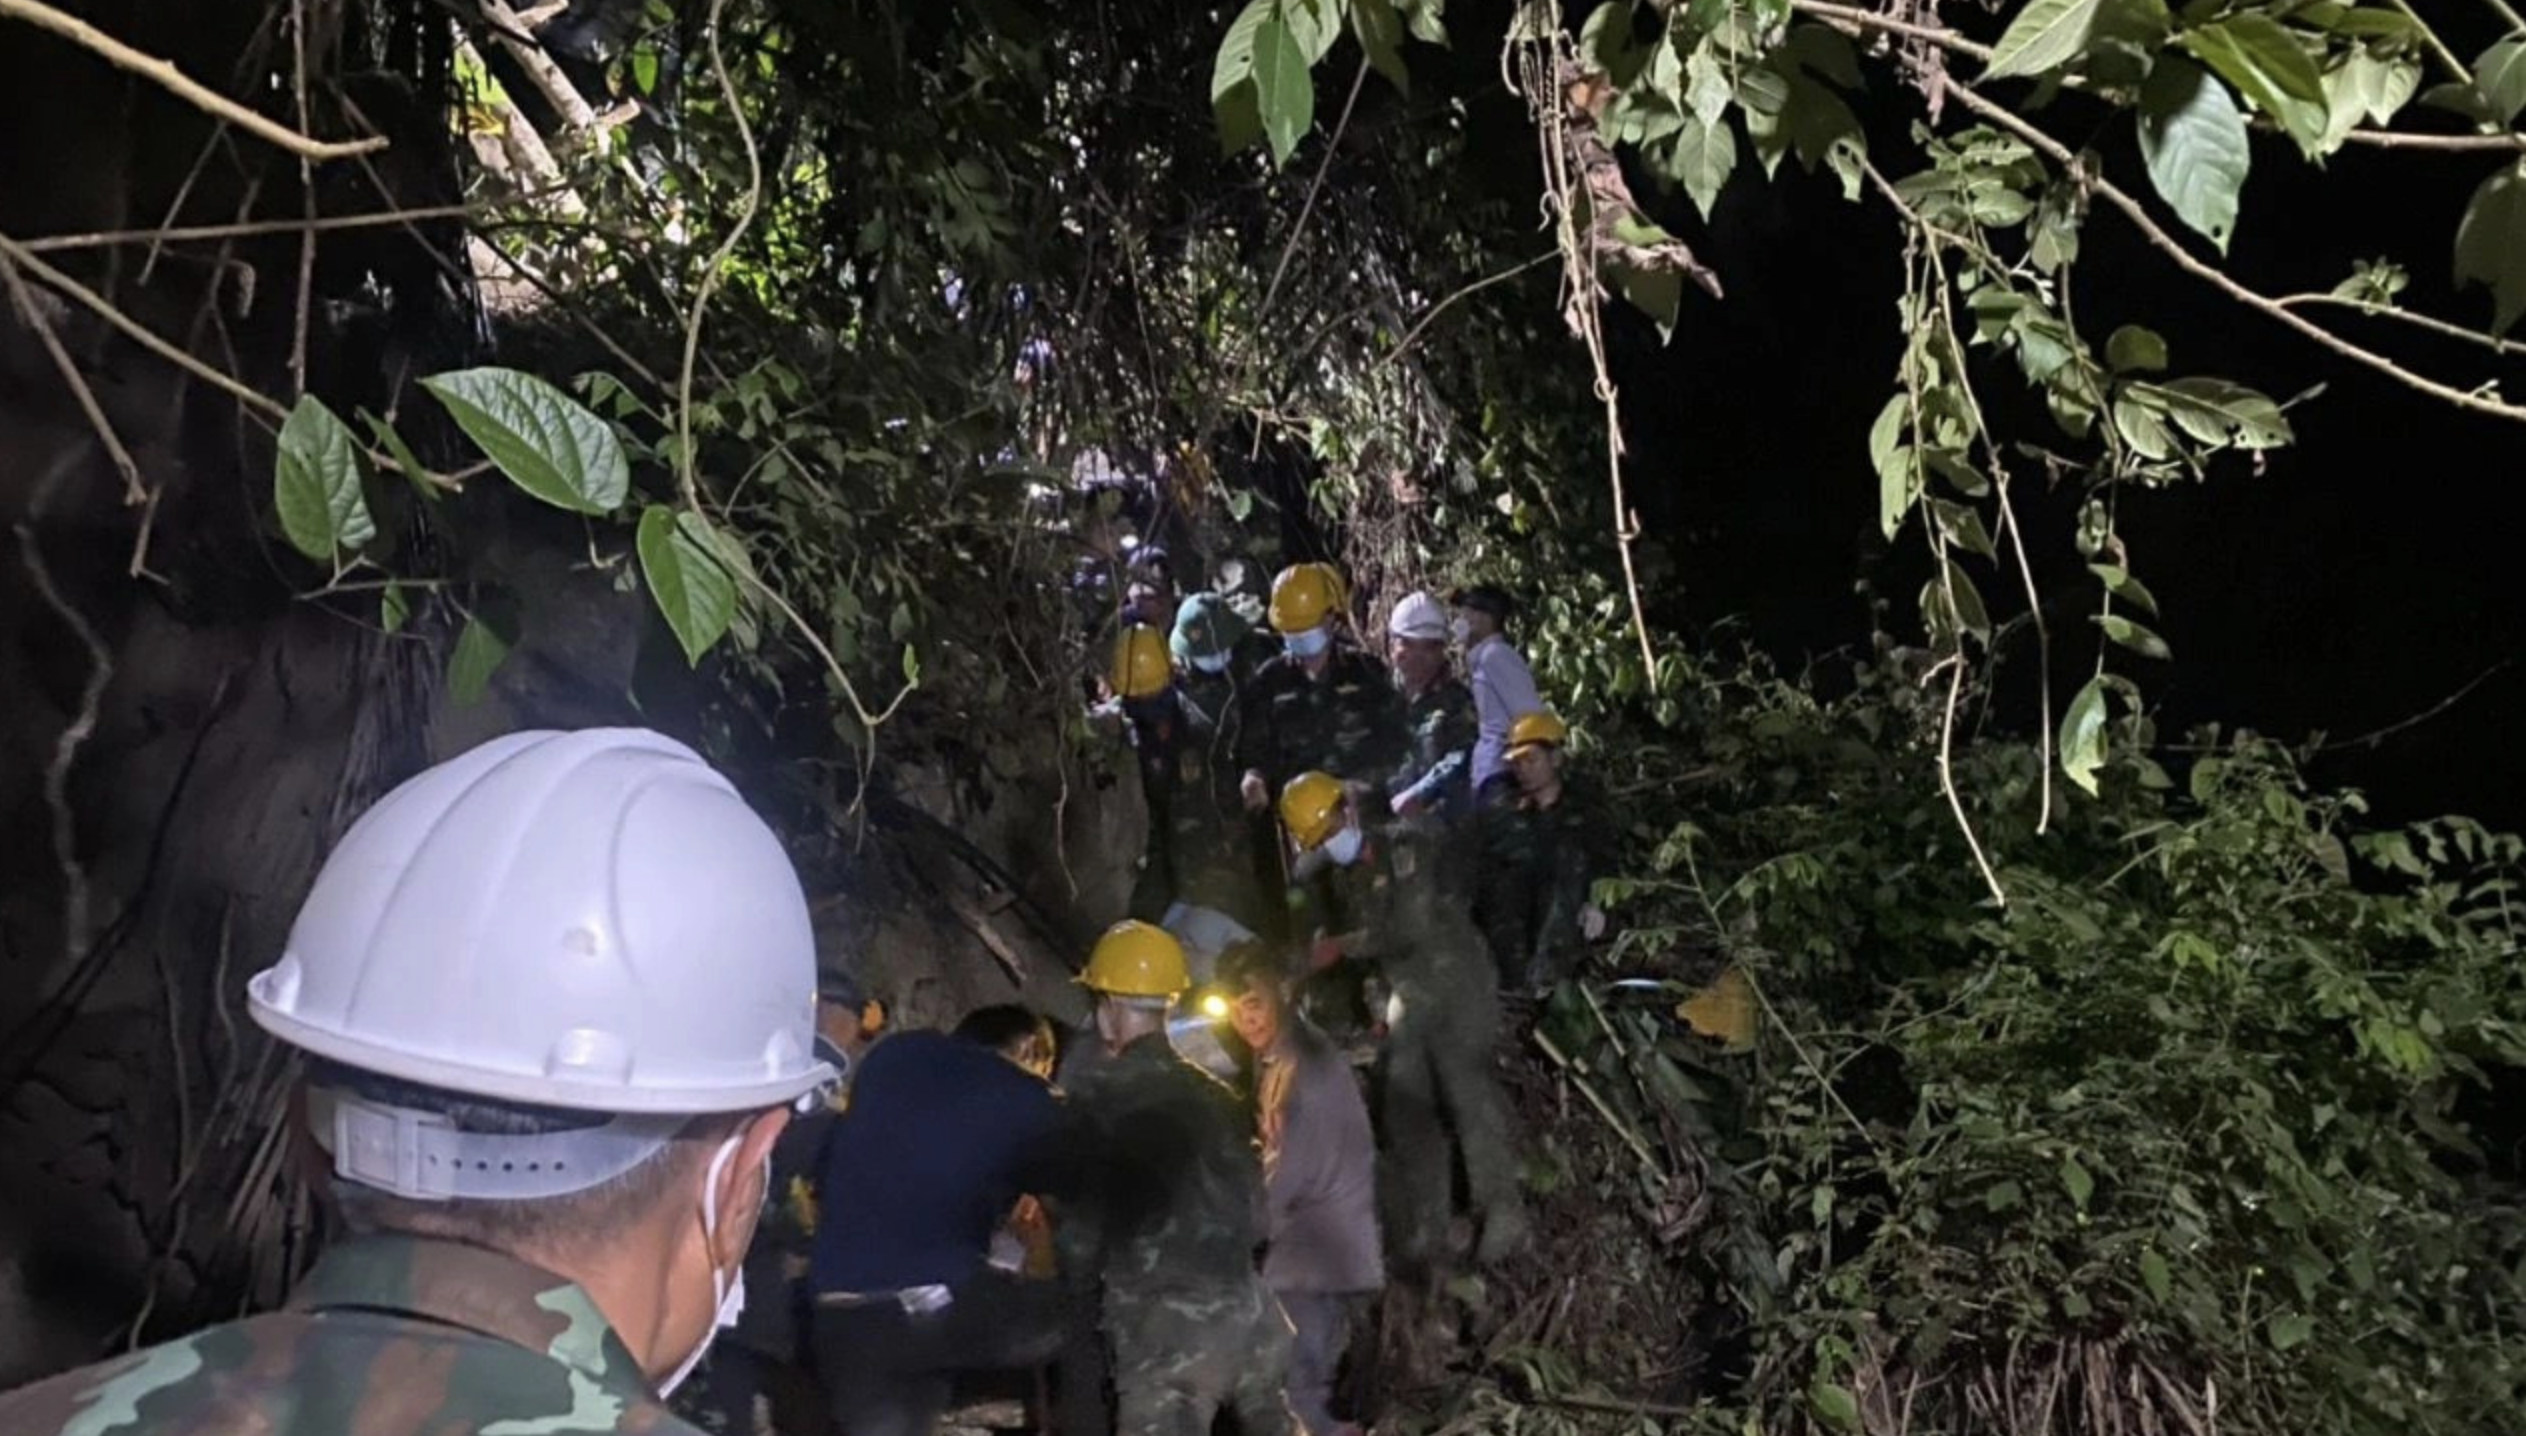 Cave collapse kills one, injures another in northern Vietnam